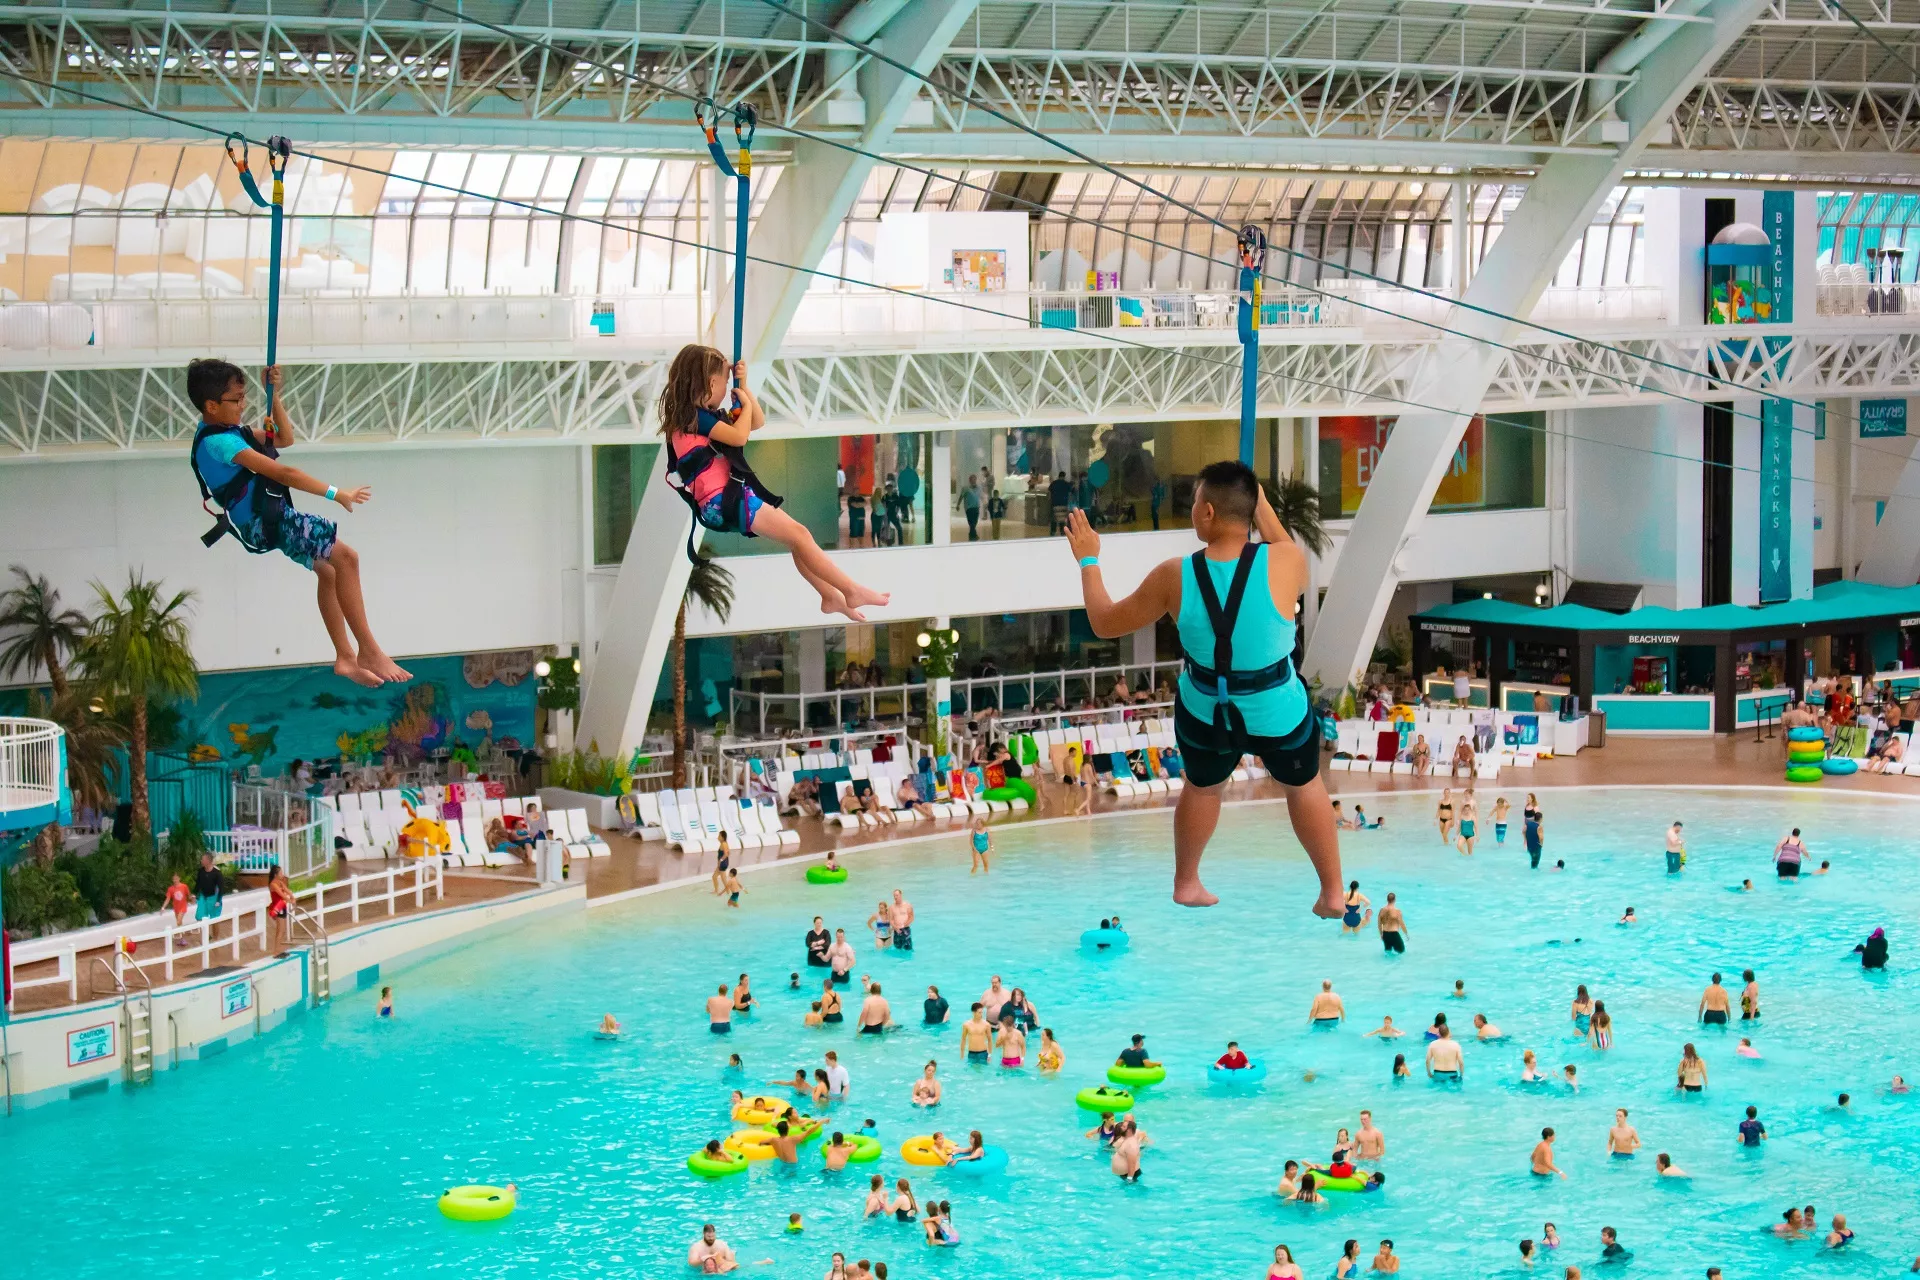 World Waterpark in Canada, North America | Water Parks - Rated 3.7